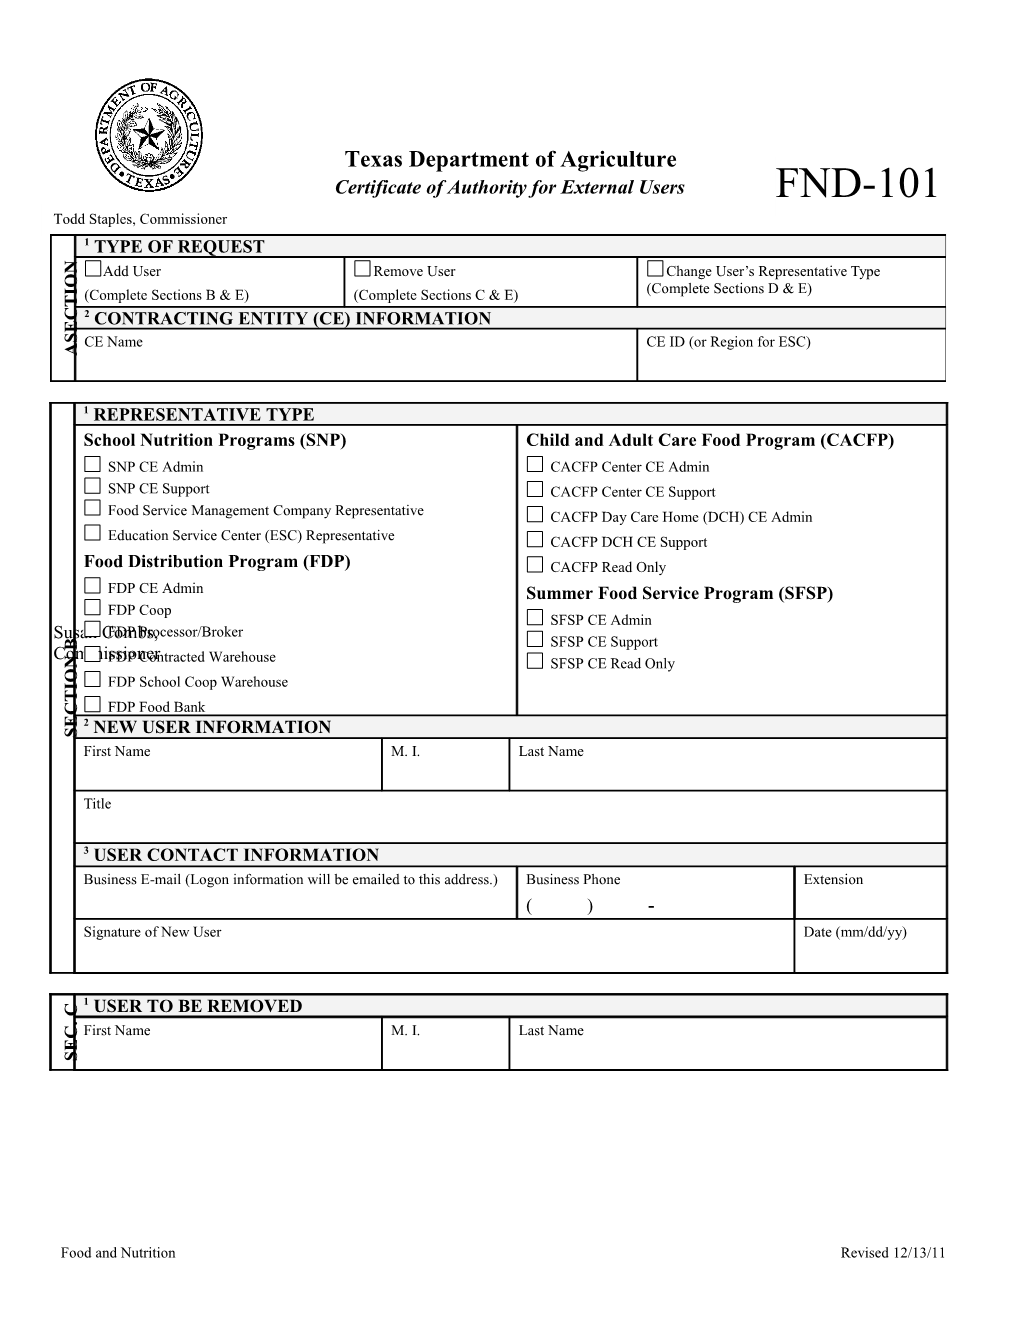 FND-101 Certificate of Authority for External Users